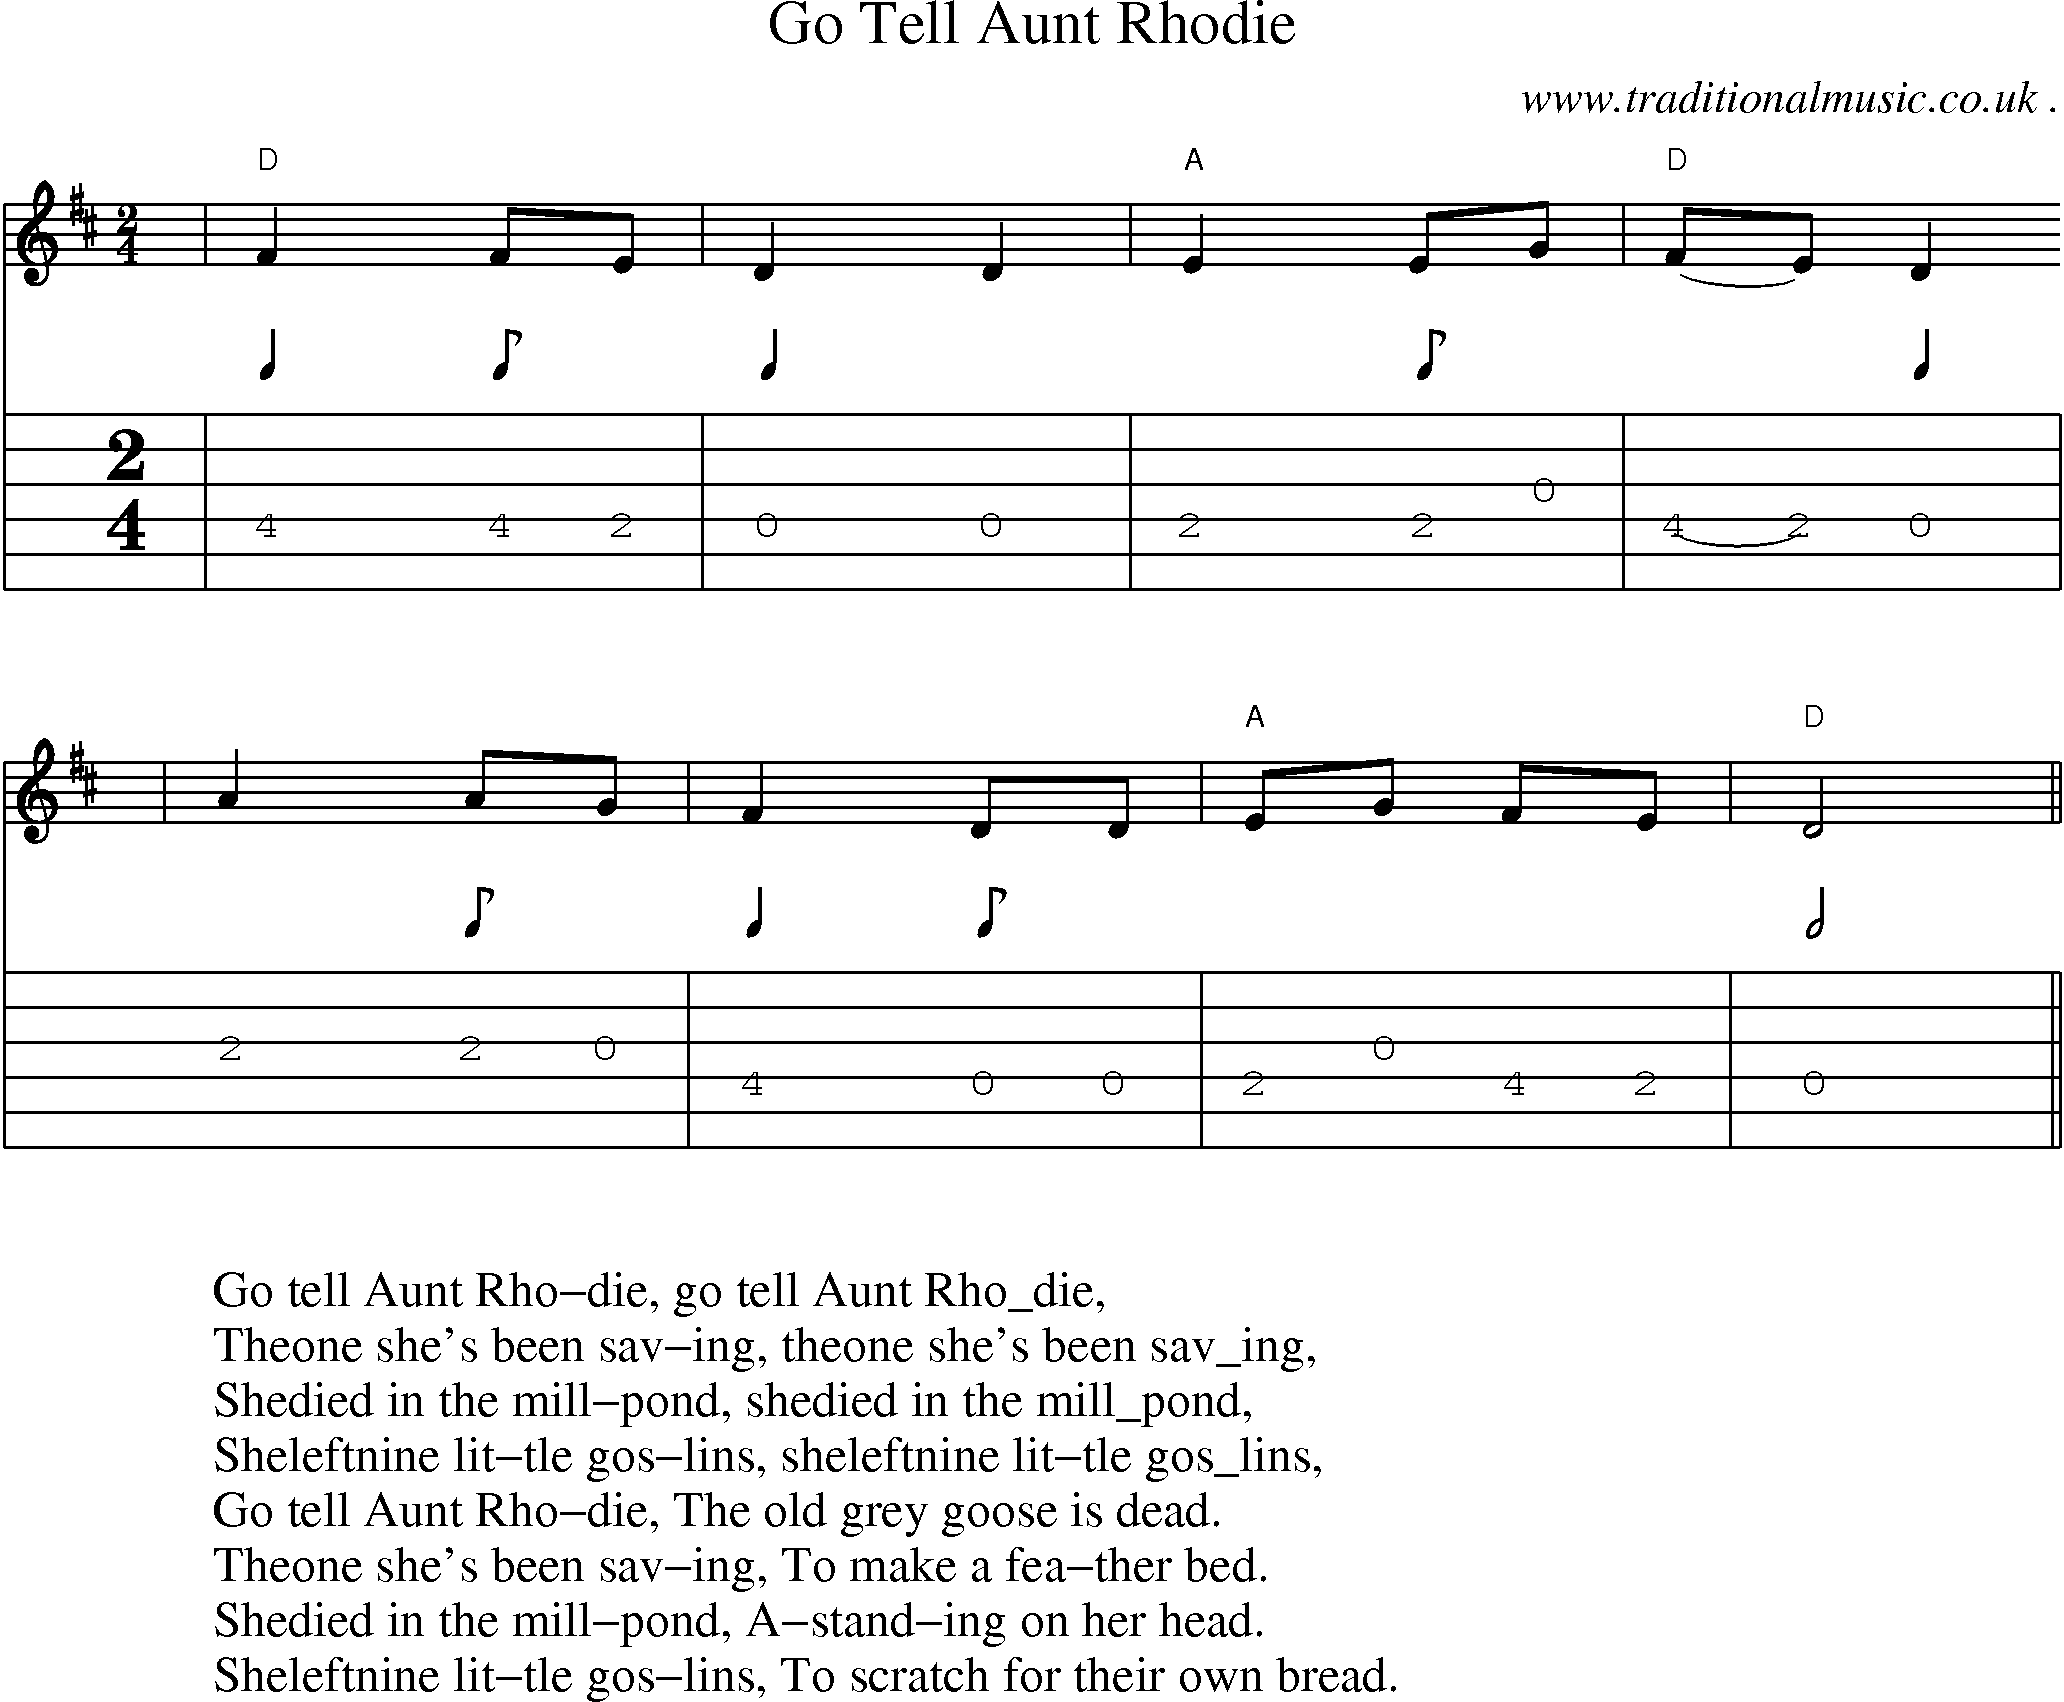 Music Score and Guitar Tabs for Go Tell Aunt Rhodie